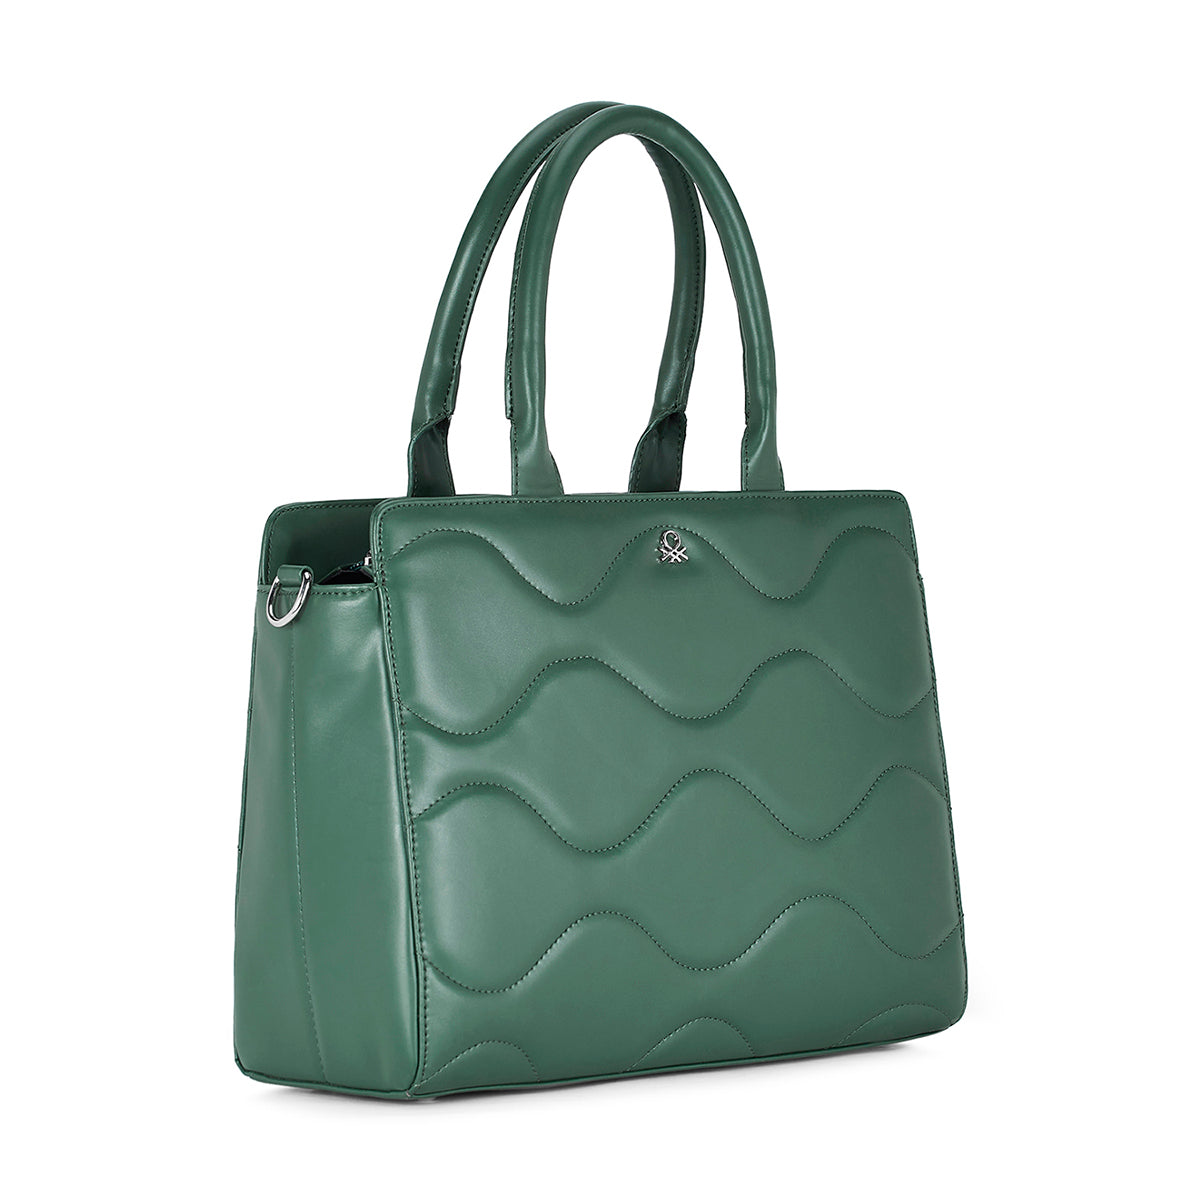 United Colors of Benetton Camilla Woman's PU Tote-Bottle Green